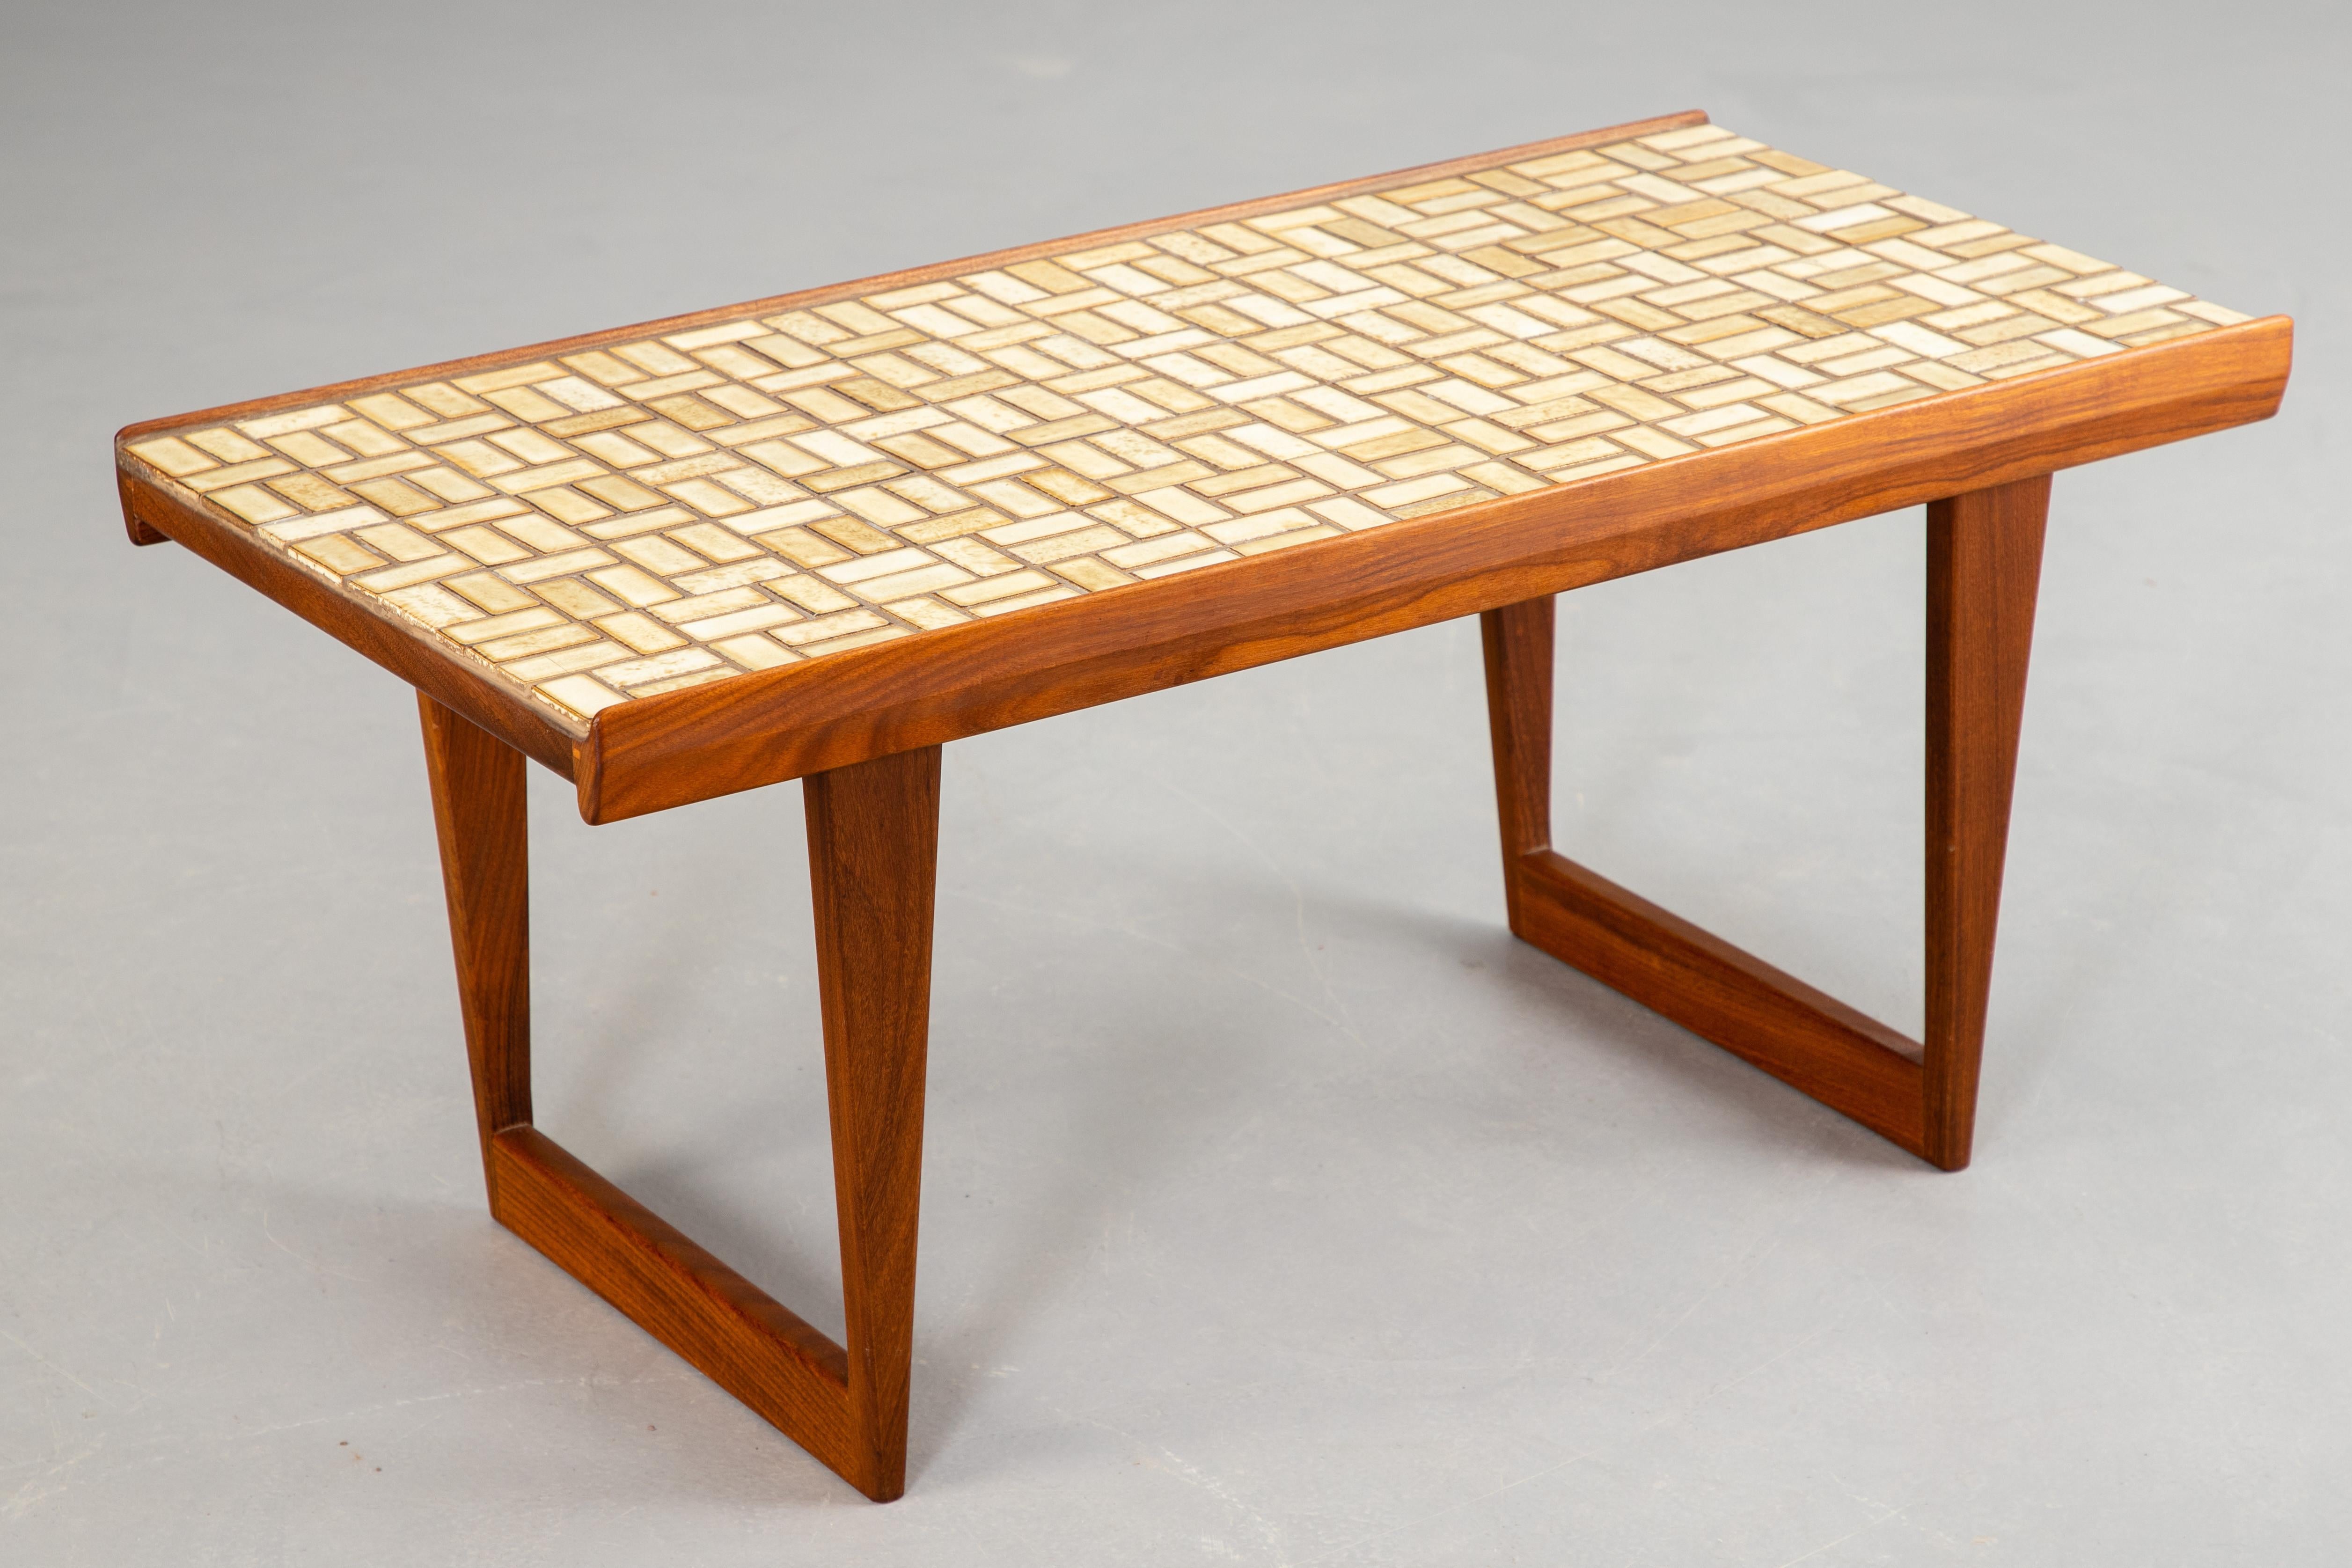 Teak side table rare model by Peter Lovig. made in Denmark, 1950s/60s. Teak construction, with tiled ceramic surface and grooved longitudinal edges made of solid teak wood. Marked on the underside.
Good condition 